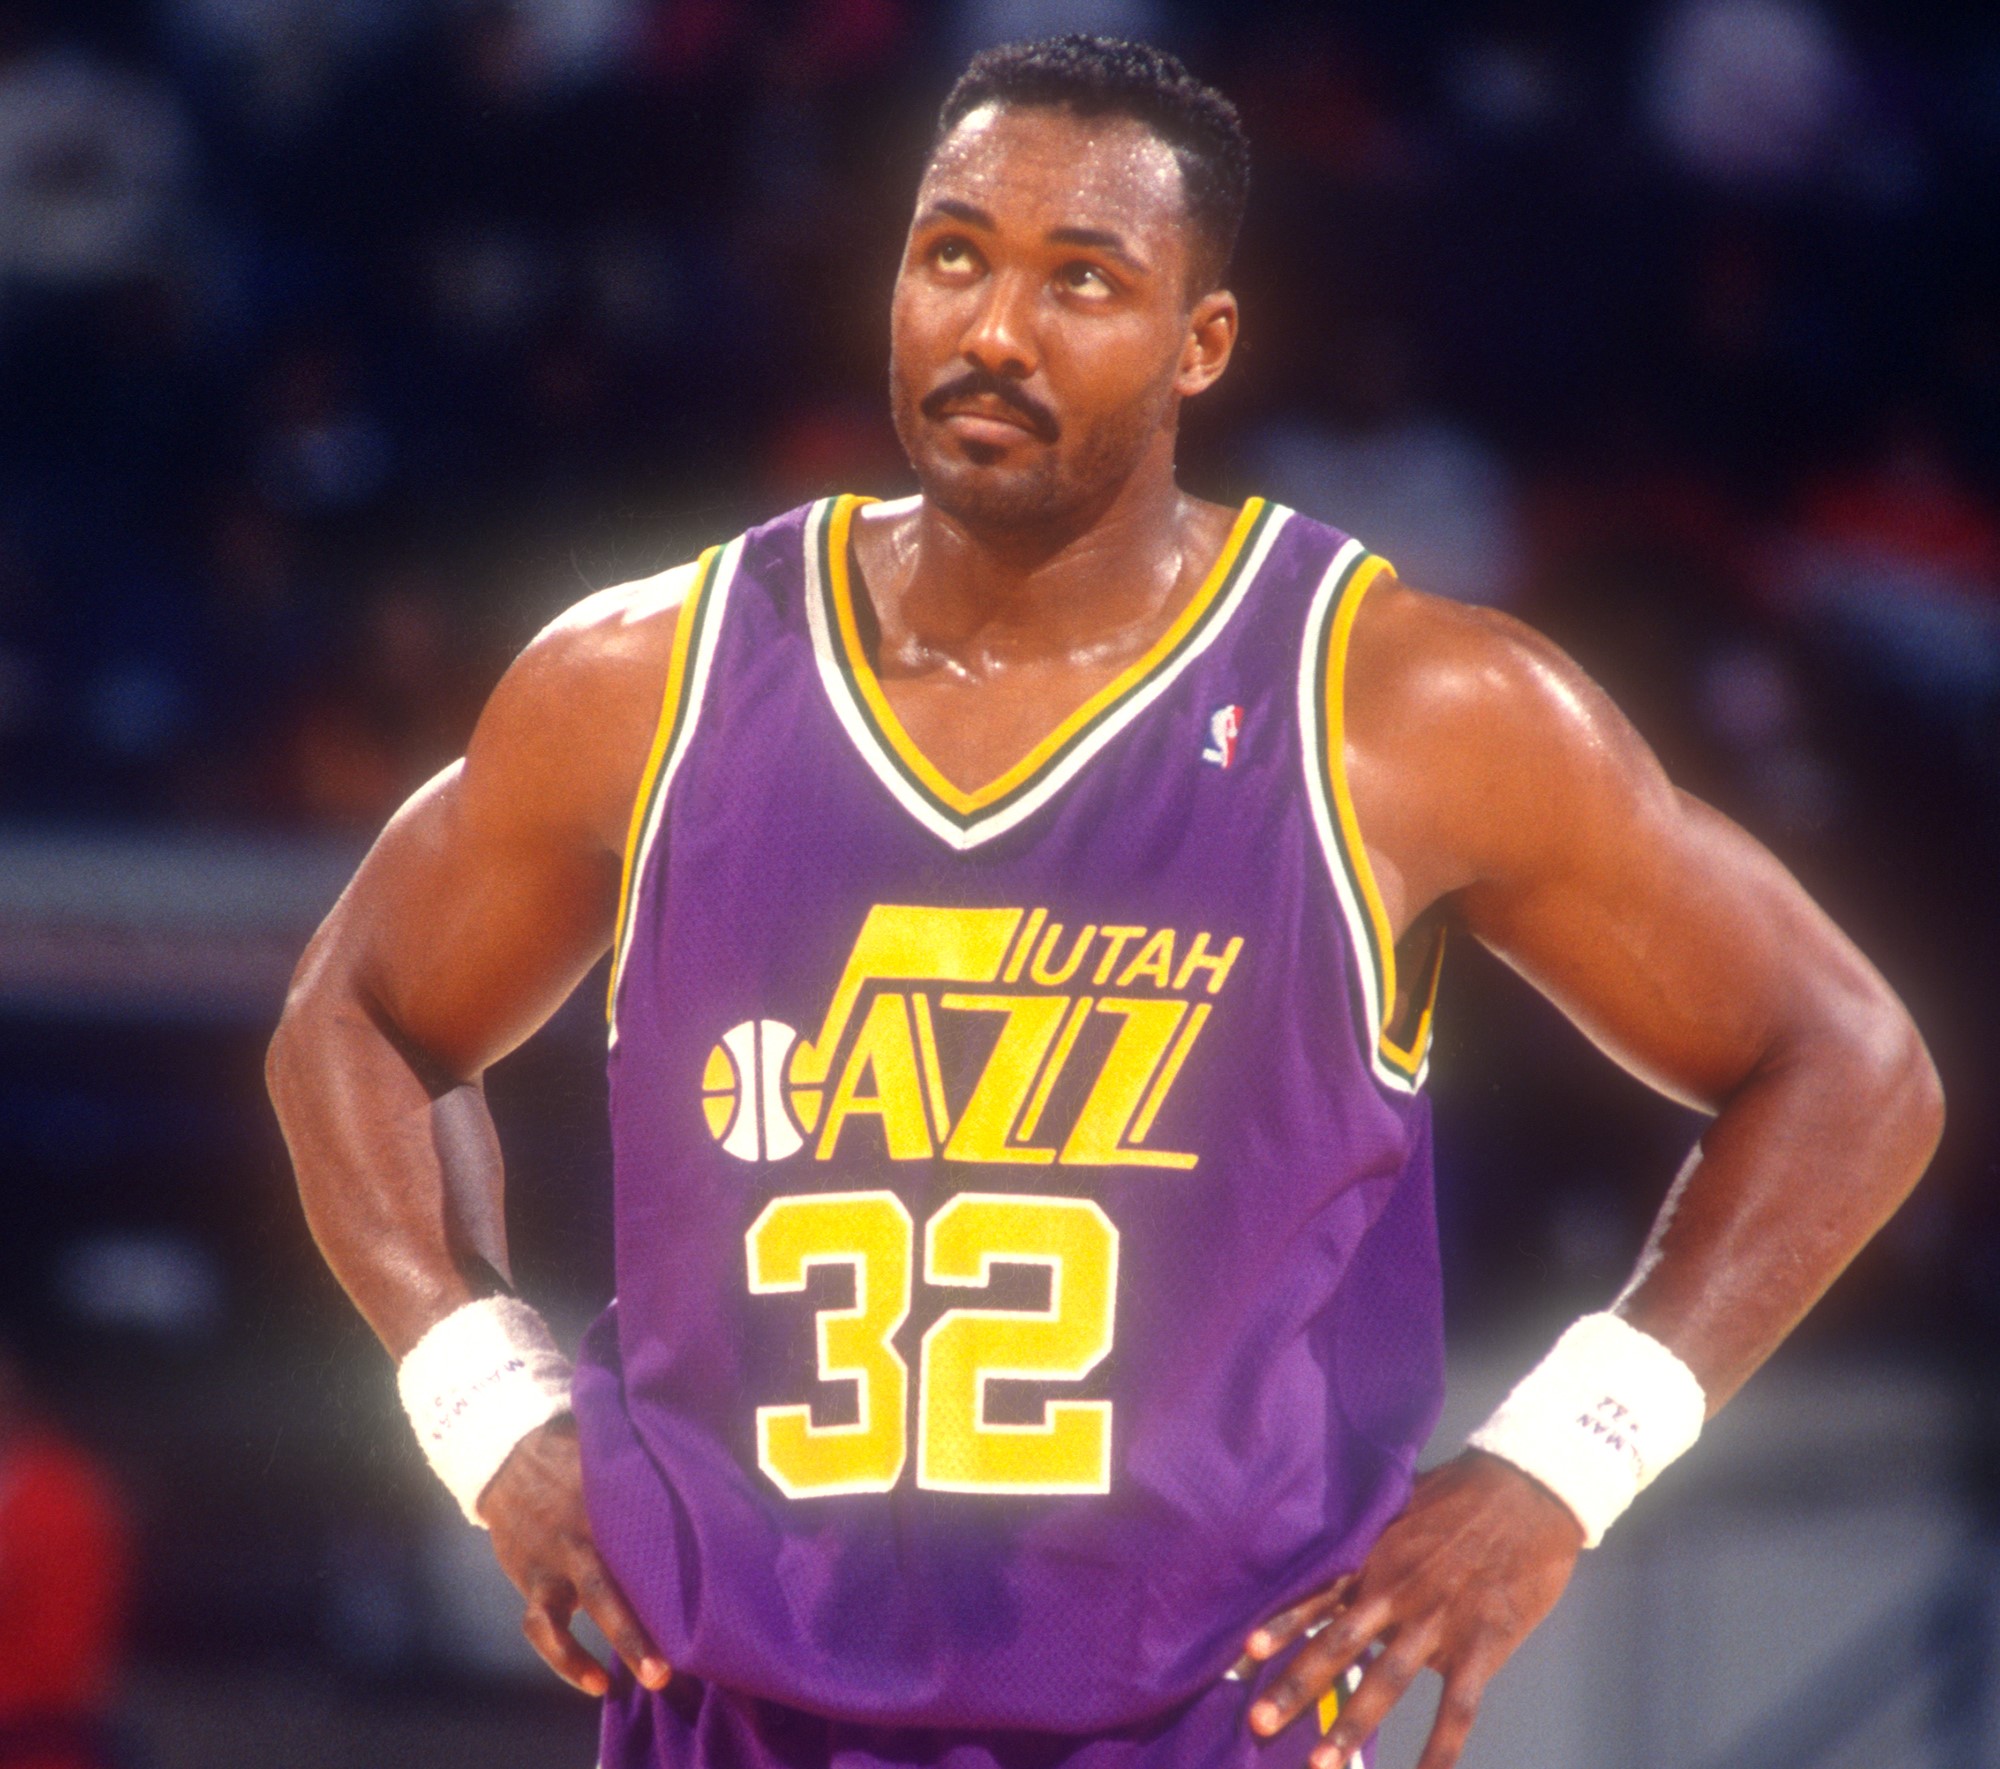 Karl Malone of the Utah Jazz looks on during a NBA game against the Washington Bullets.